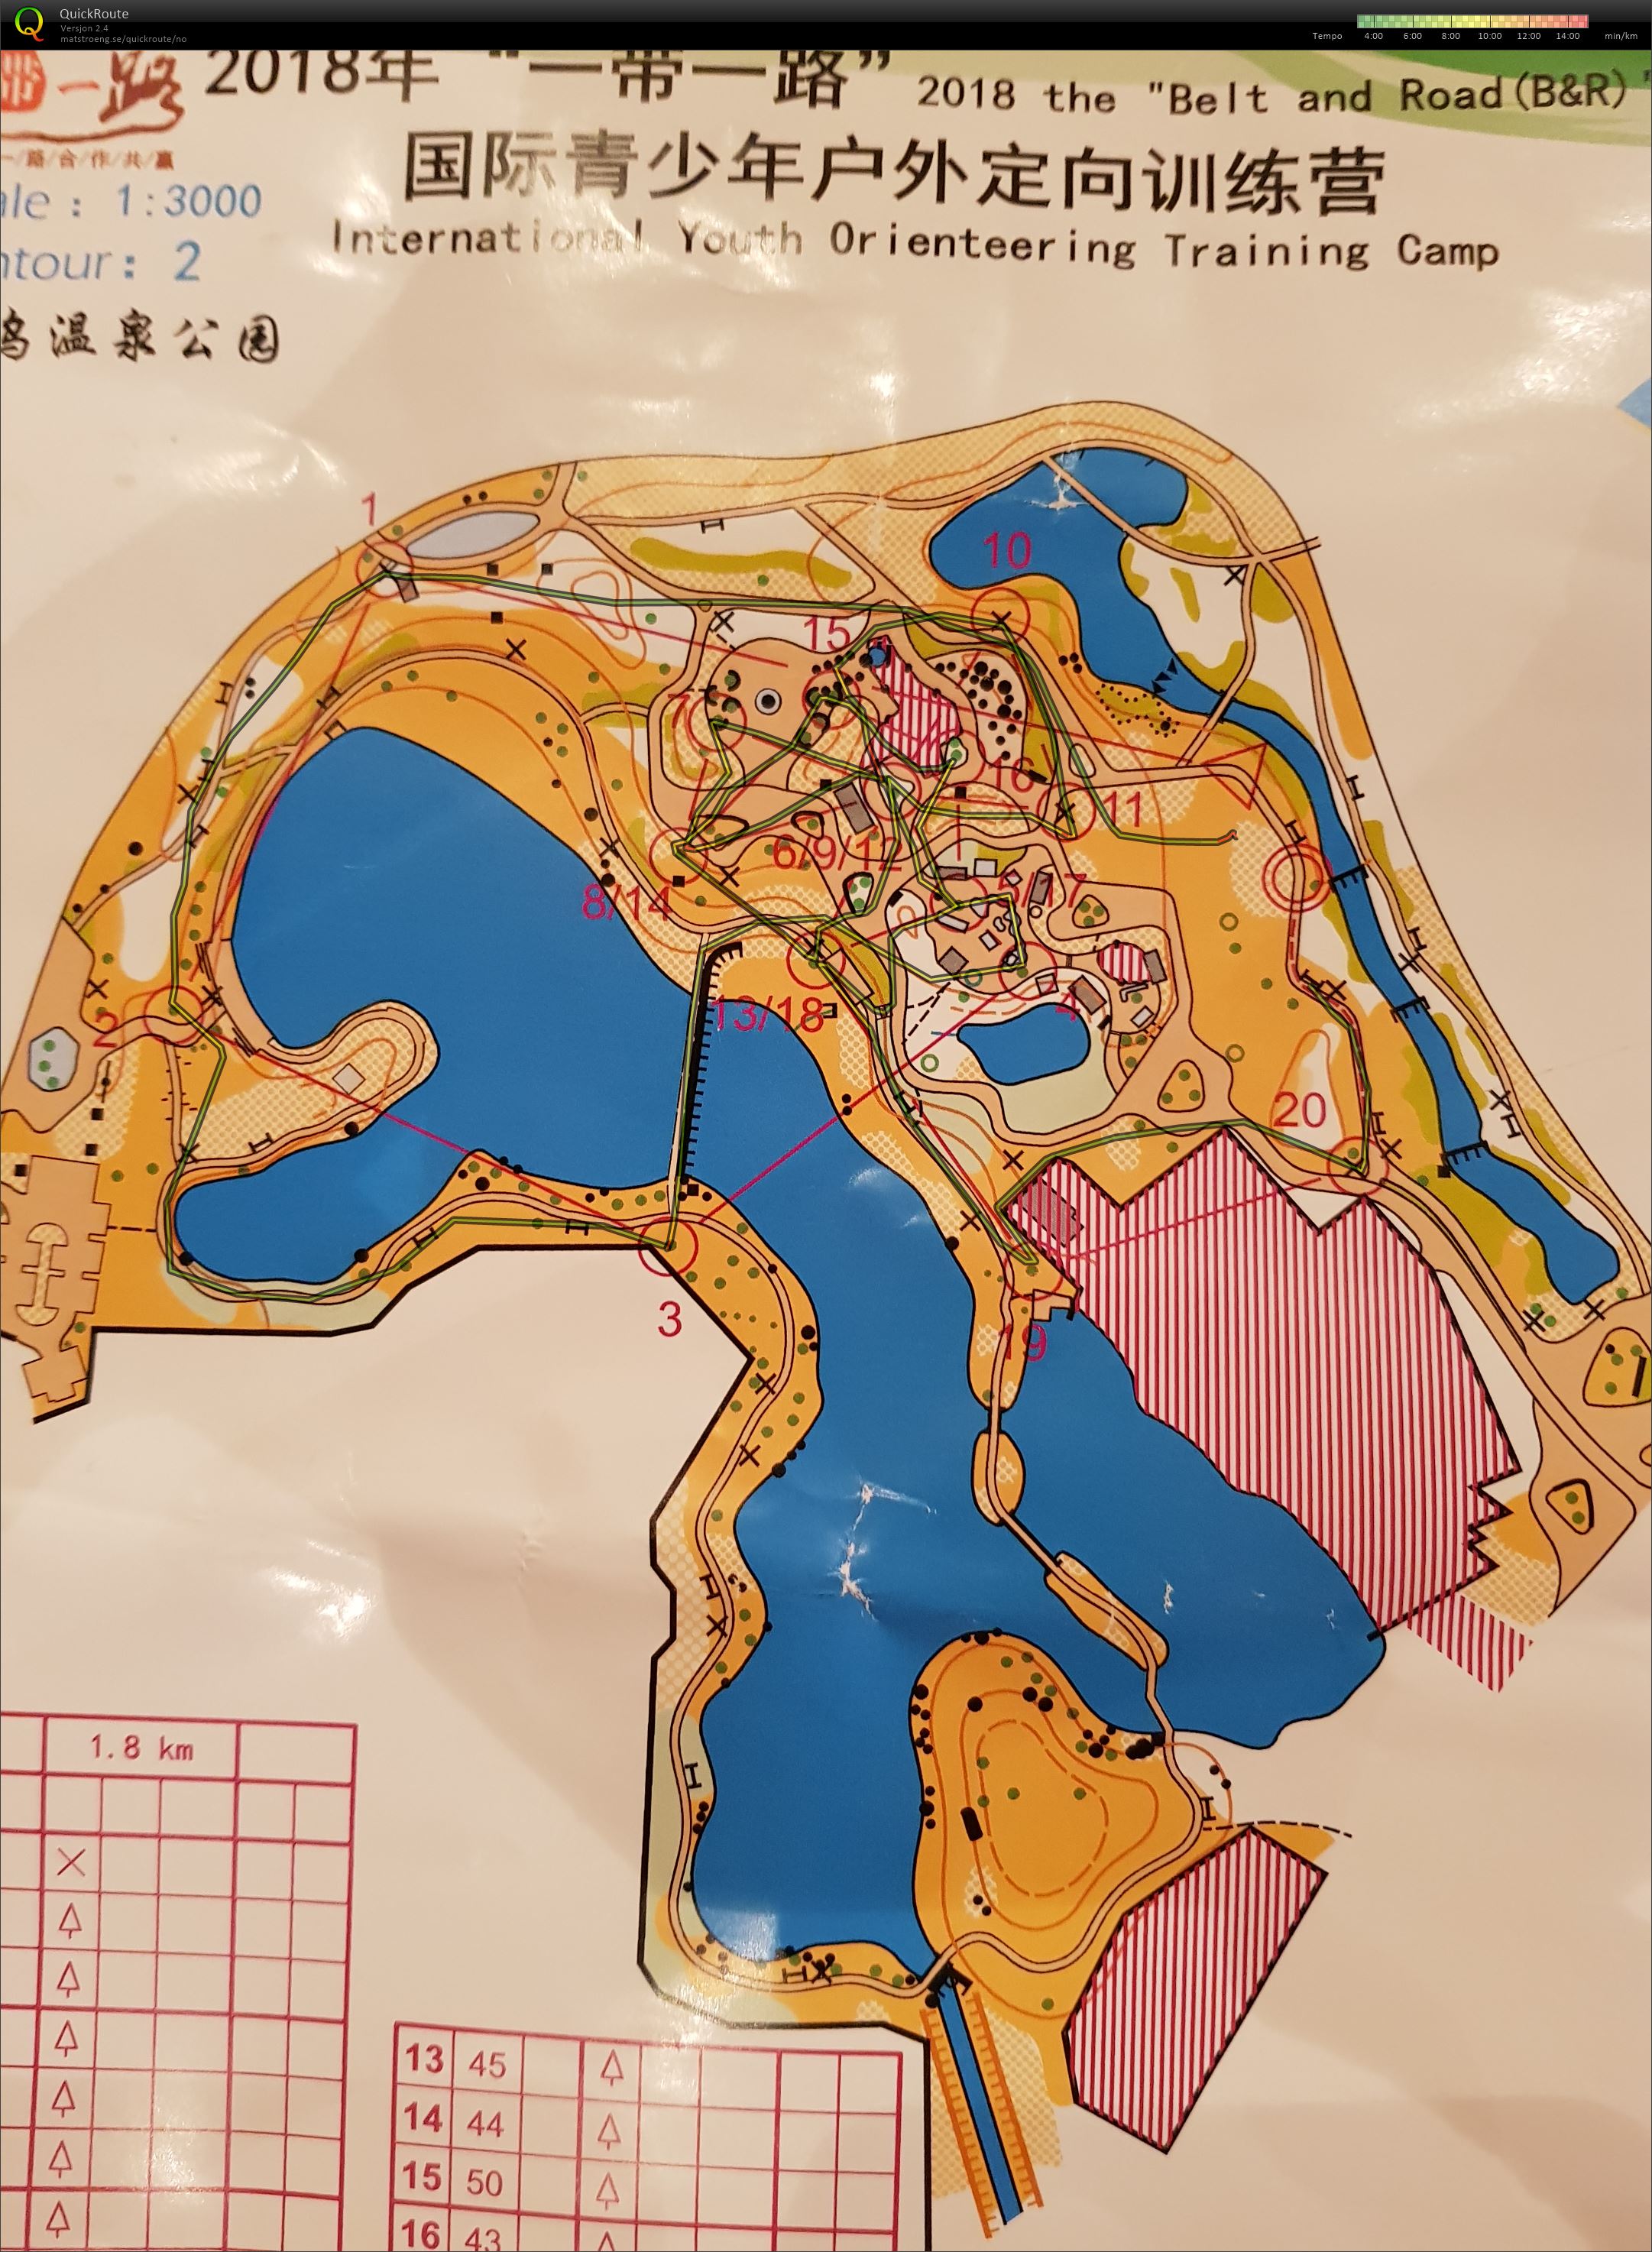 Belt and Road International Youth Orienteering Camp (27-10-2018)